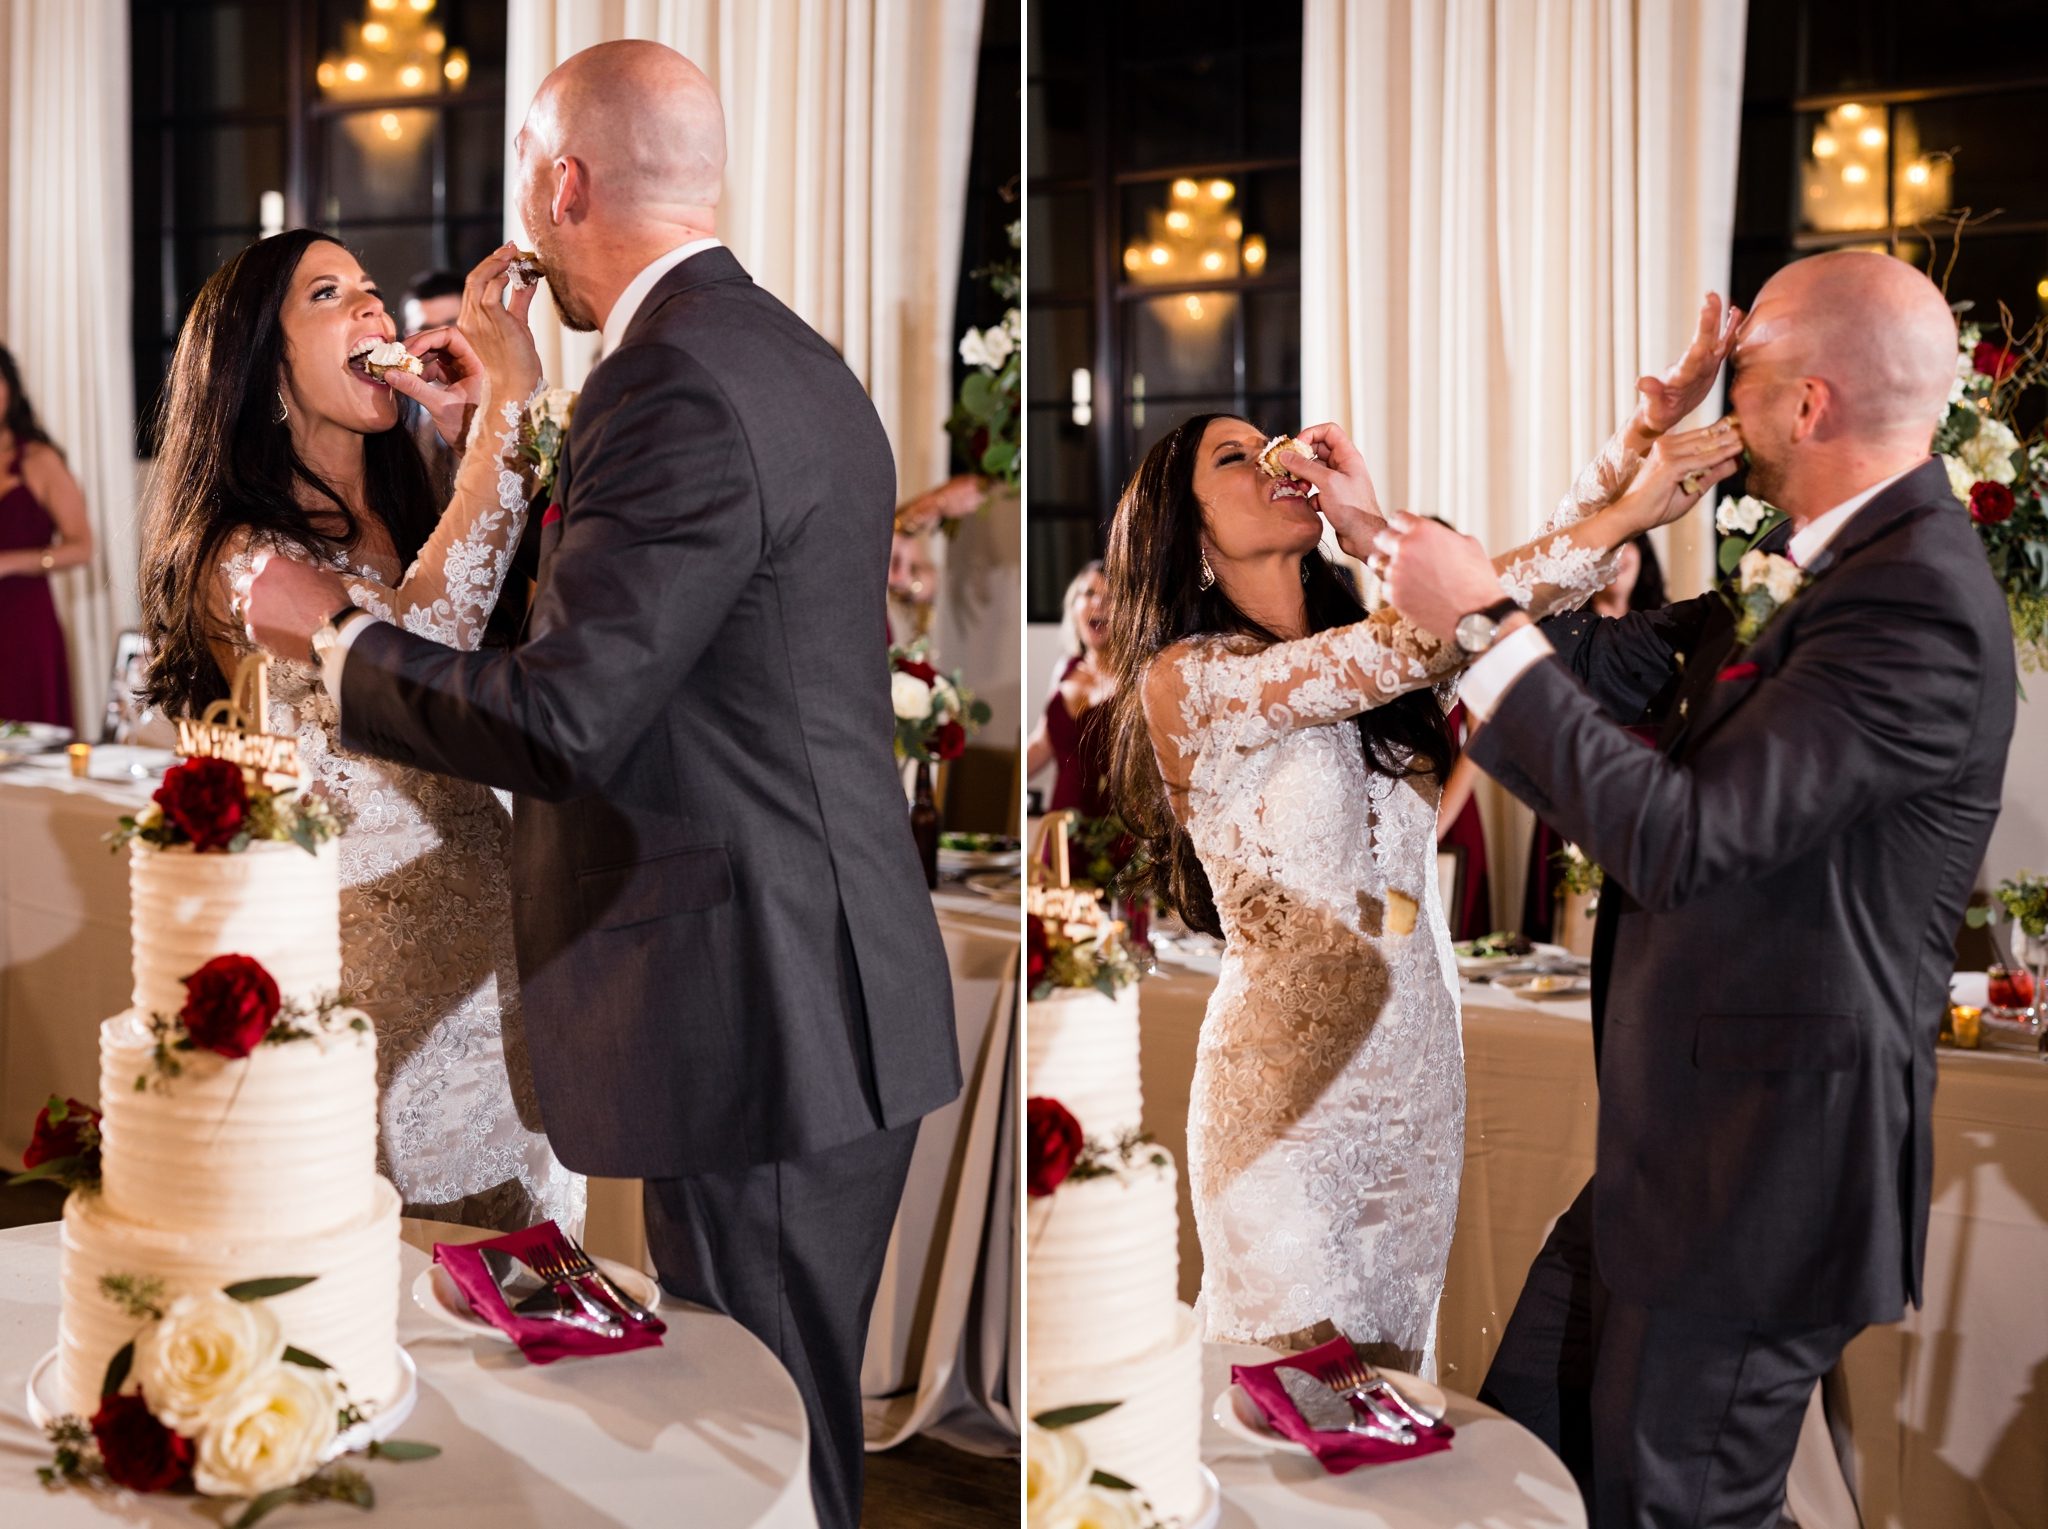 bride + groom smash cake in each other's faces